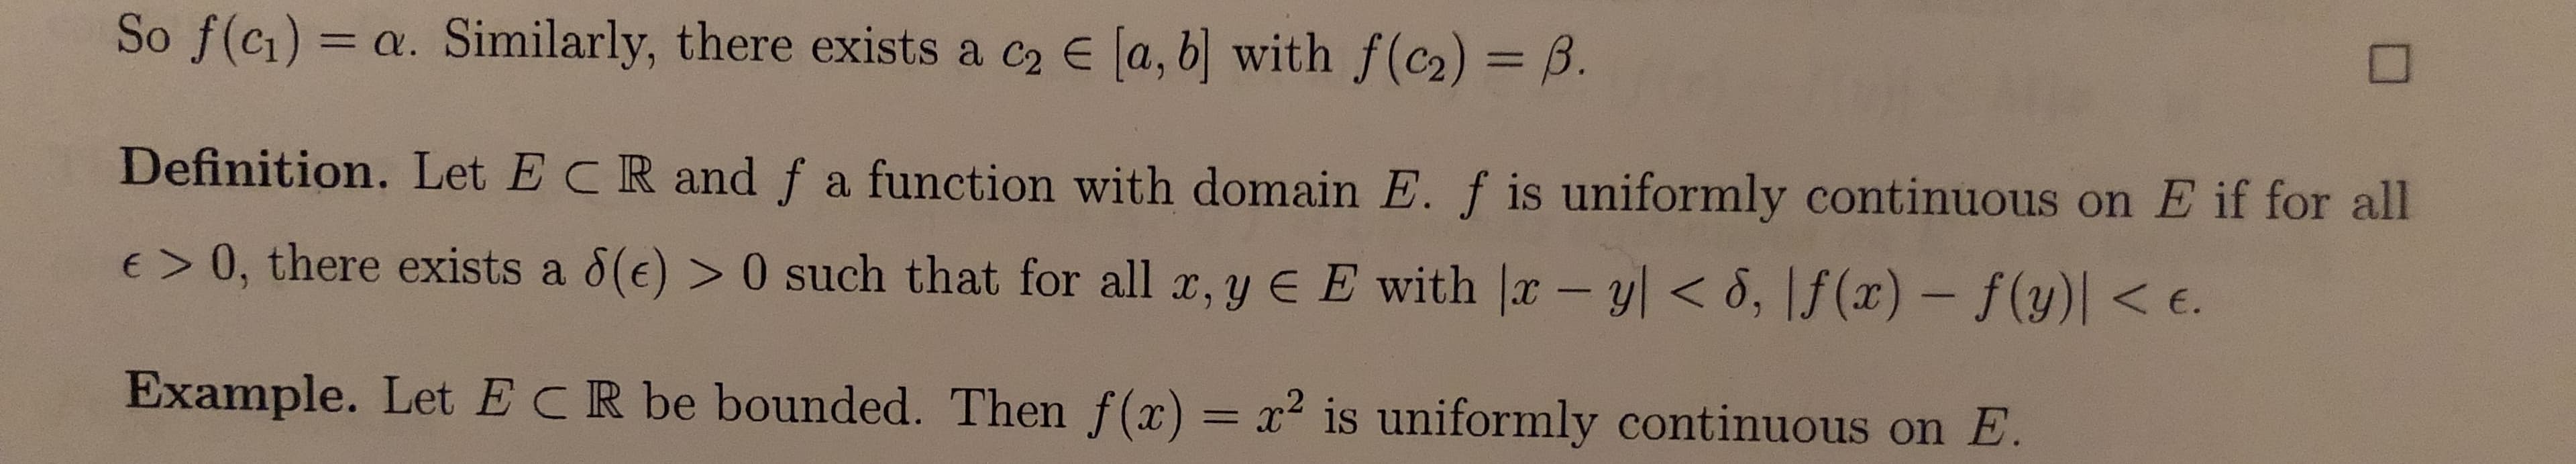 So f(c1) = a. Similarly, there exists a c2 E (a, b] with f(c2) = B.
%3D
Definition. Let ECR and f a function with domain E. f is uniformly continuous on E if for all
E> 0, there exists a 8(e) > 0 such that for all x, y E E with |x -y| < 8, |f(x) – f(y)| < e.
Example. Let ECR be bounded. Then f(x) = x² is uniformly continuous on E.
